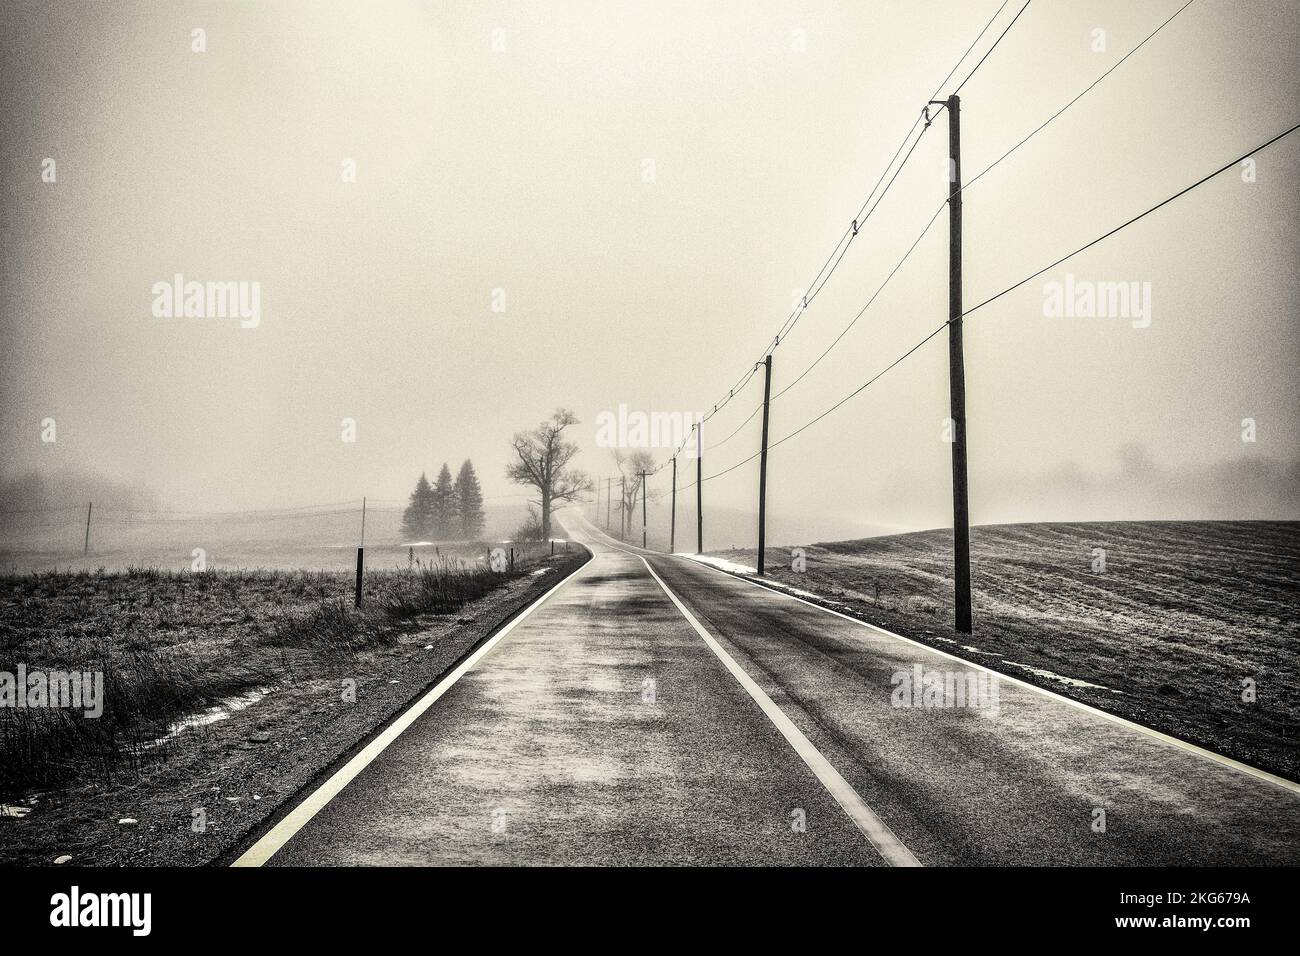 A lonely foggy road in the rural town of Templeton, Massachusetts Stock Photo